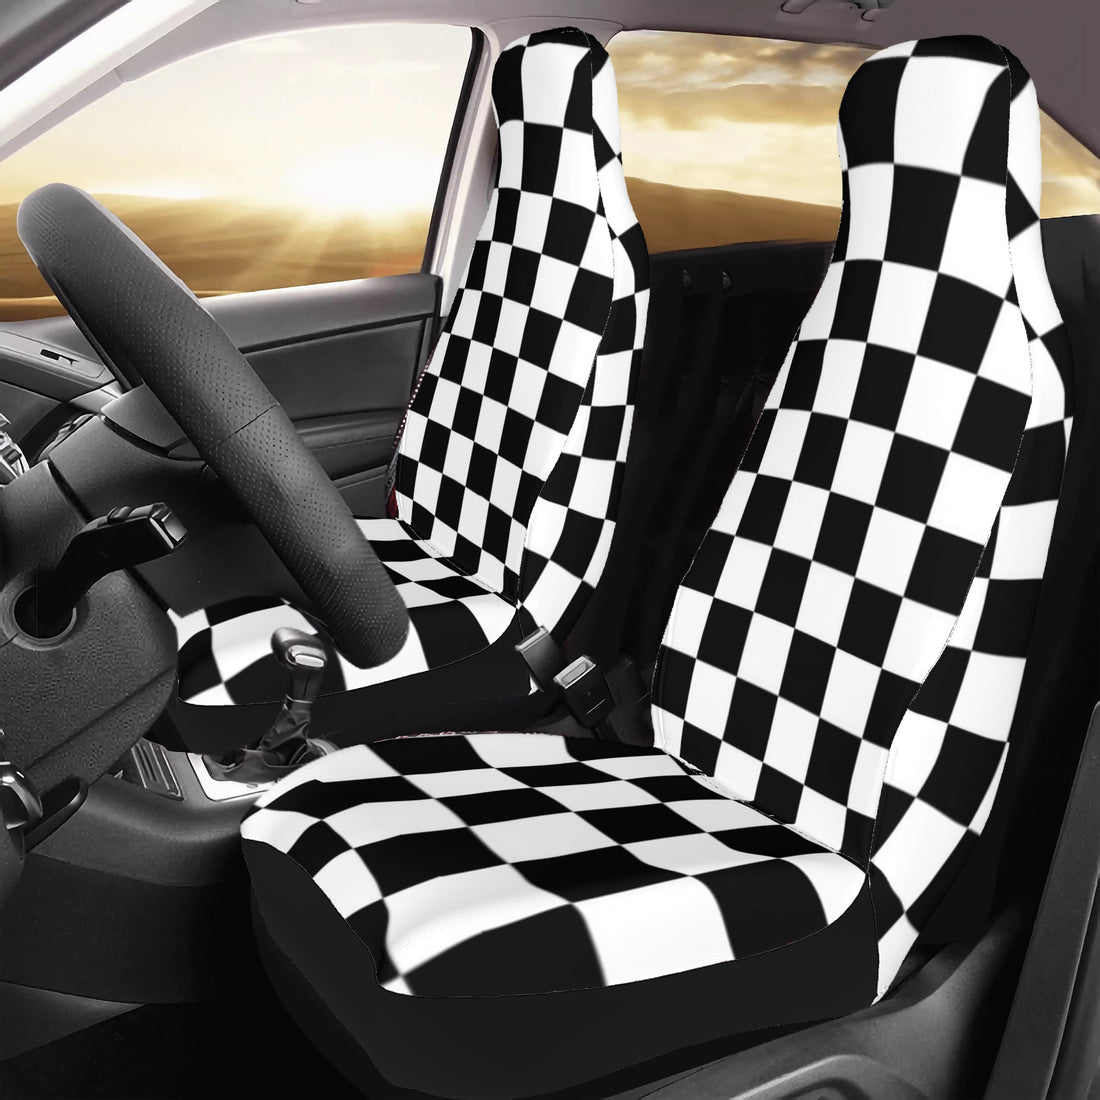 HC_T26 Car Seat Covers with Back Side Printed Black and White Home-clothes-jewelry